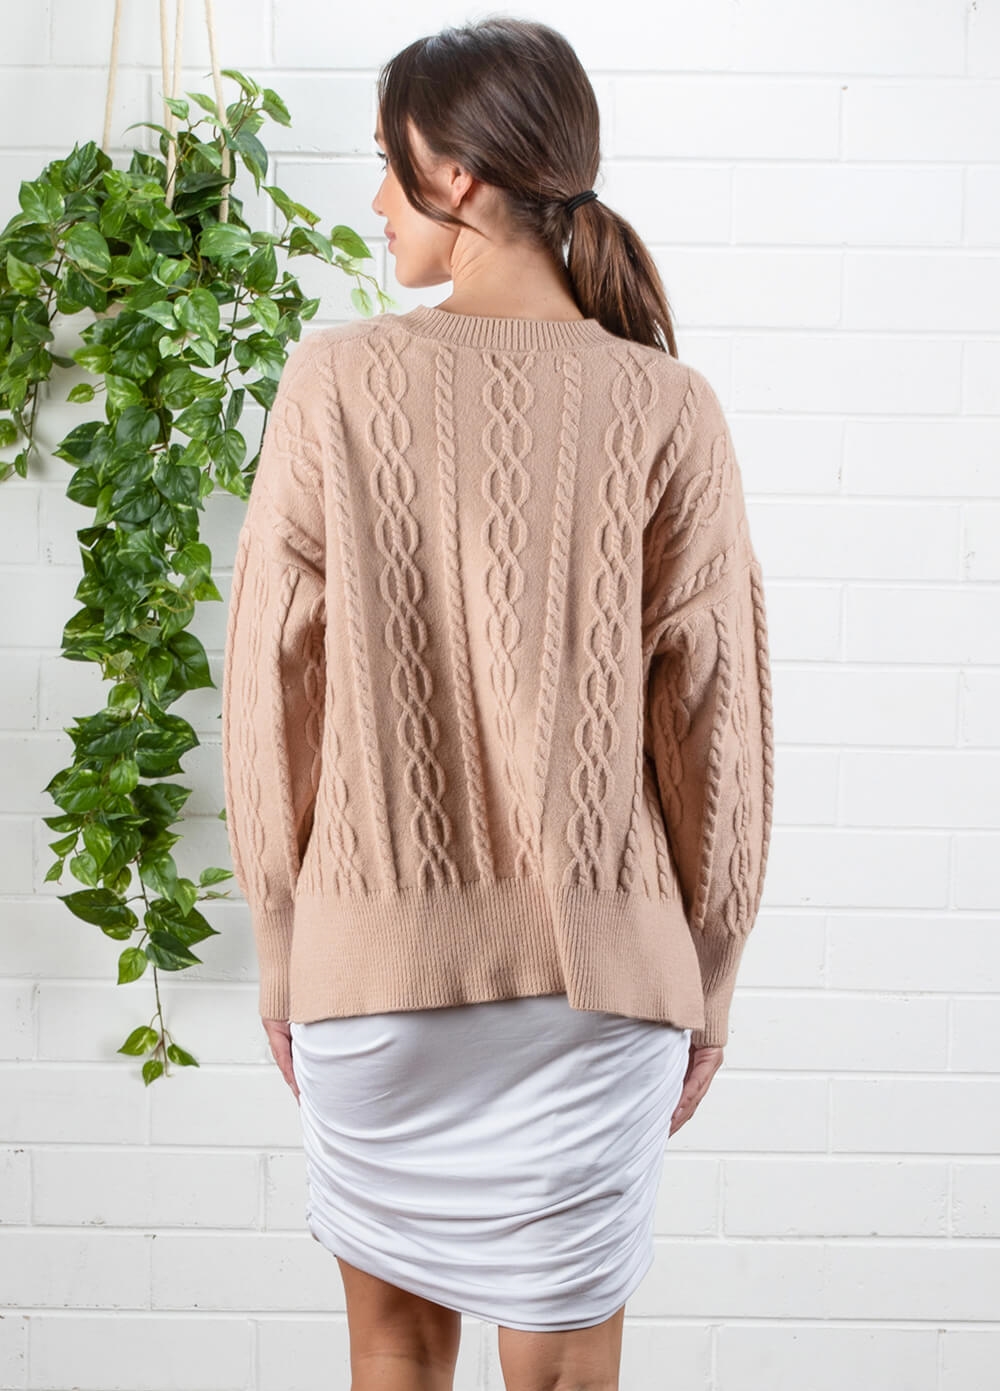 Lait & Co - Josie Cable Knit Cropped Jumper in Camel | Queen Bee